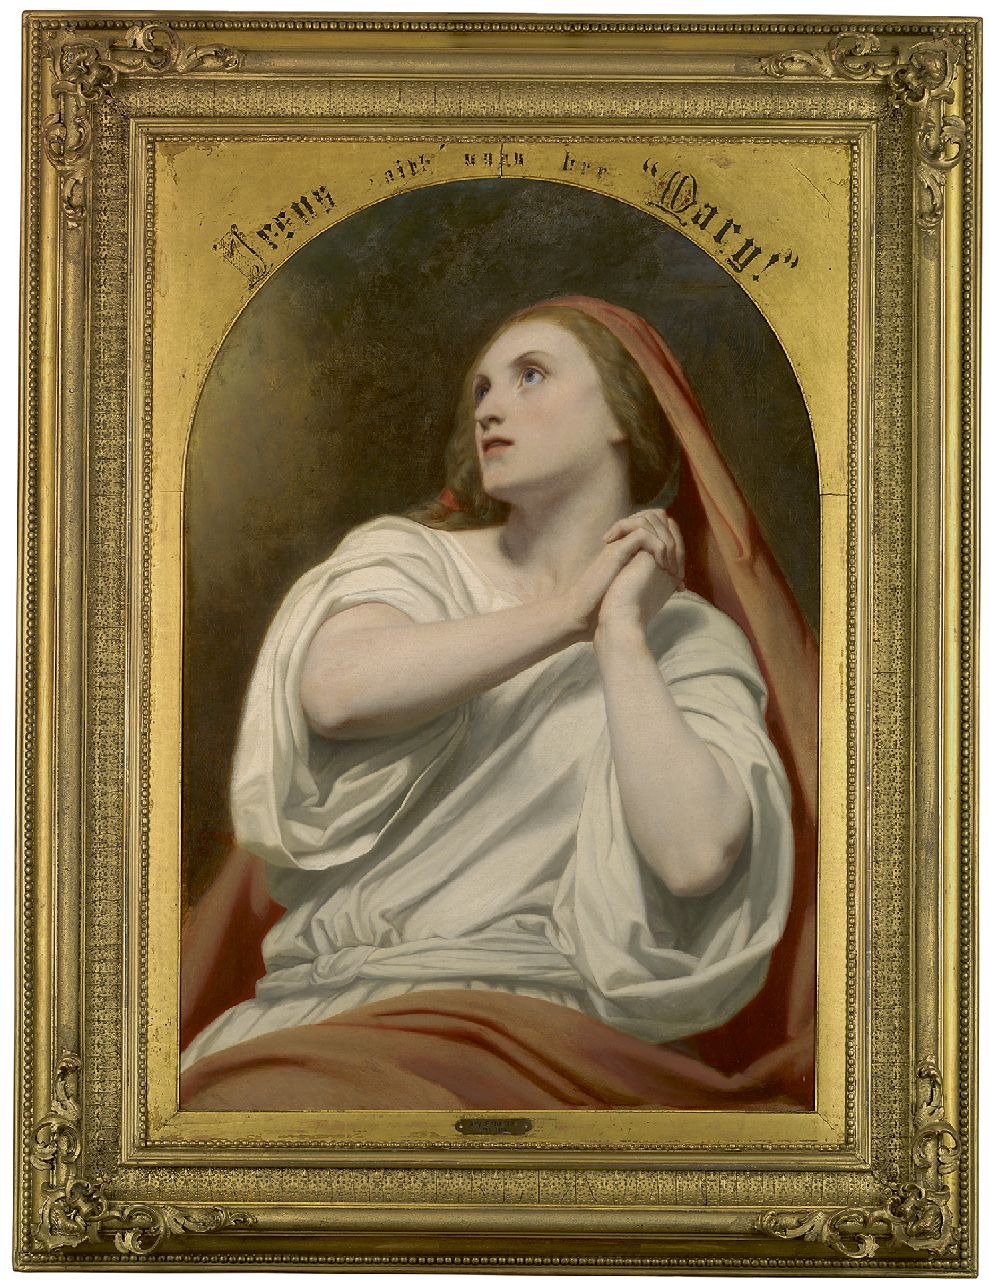 Scheffer A.  | Ary Scheffer | Paintings offered for sale | Maria Magdalena in extacy, oil on canvas 94.9 x 64.1 cm, signed c.l. and dated 1855